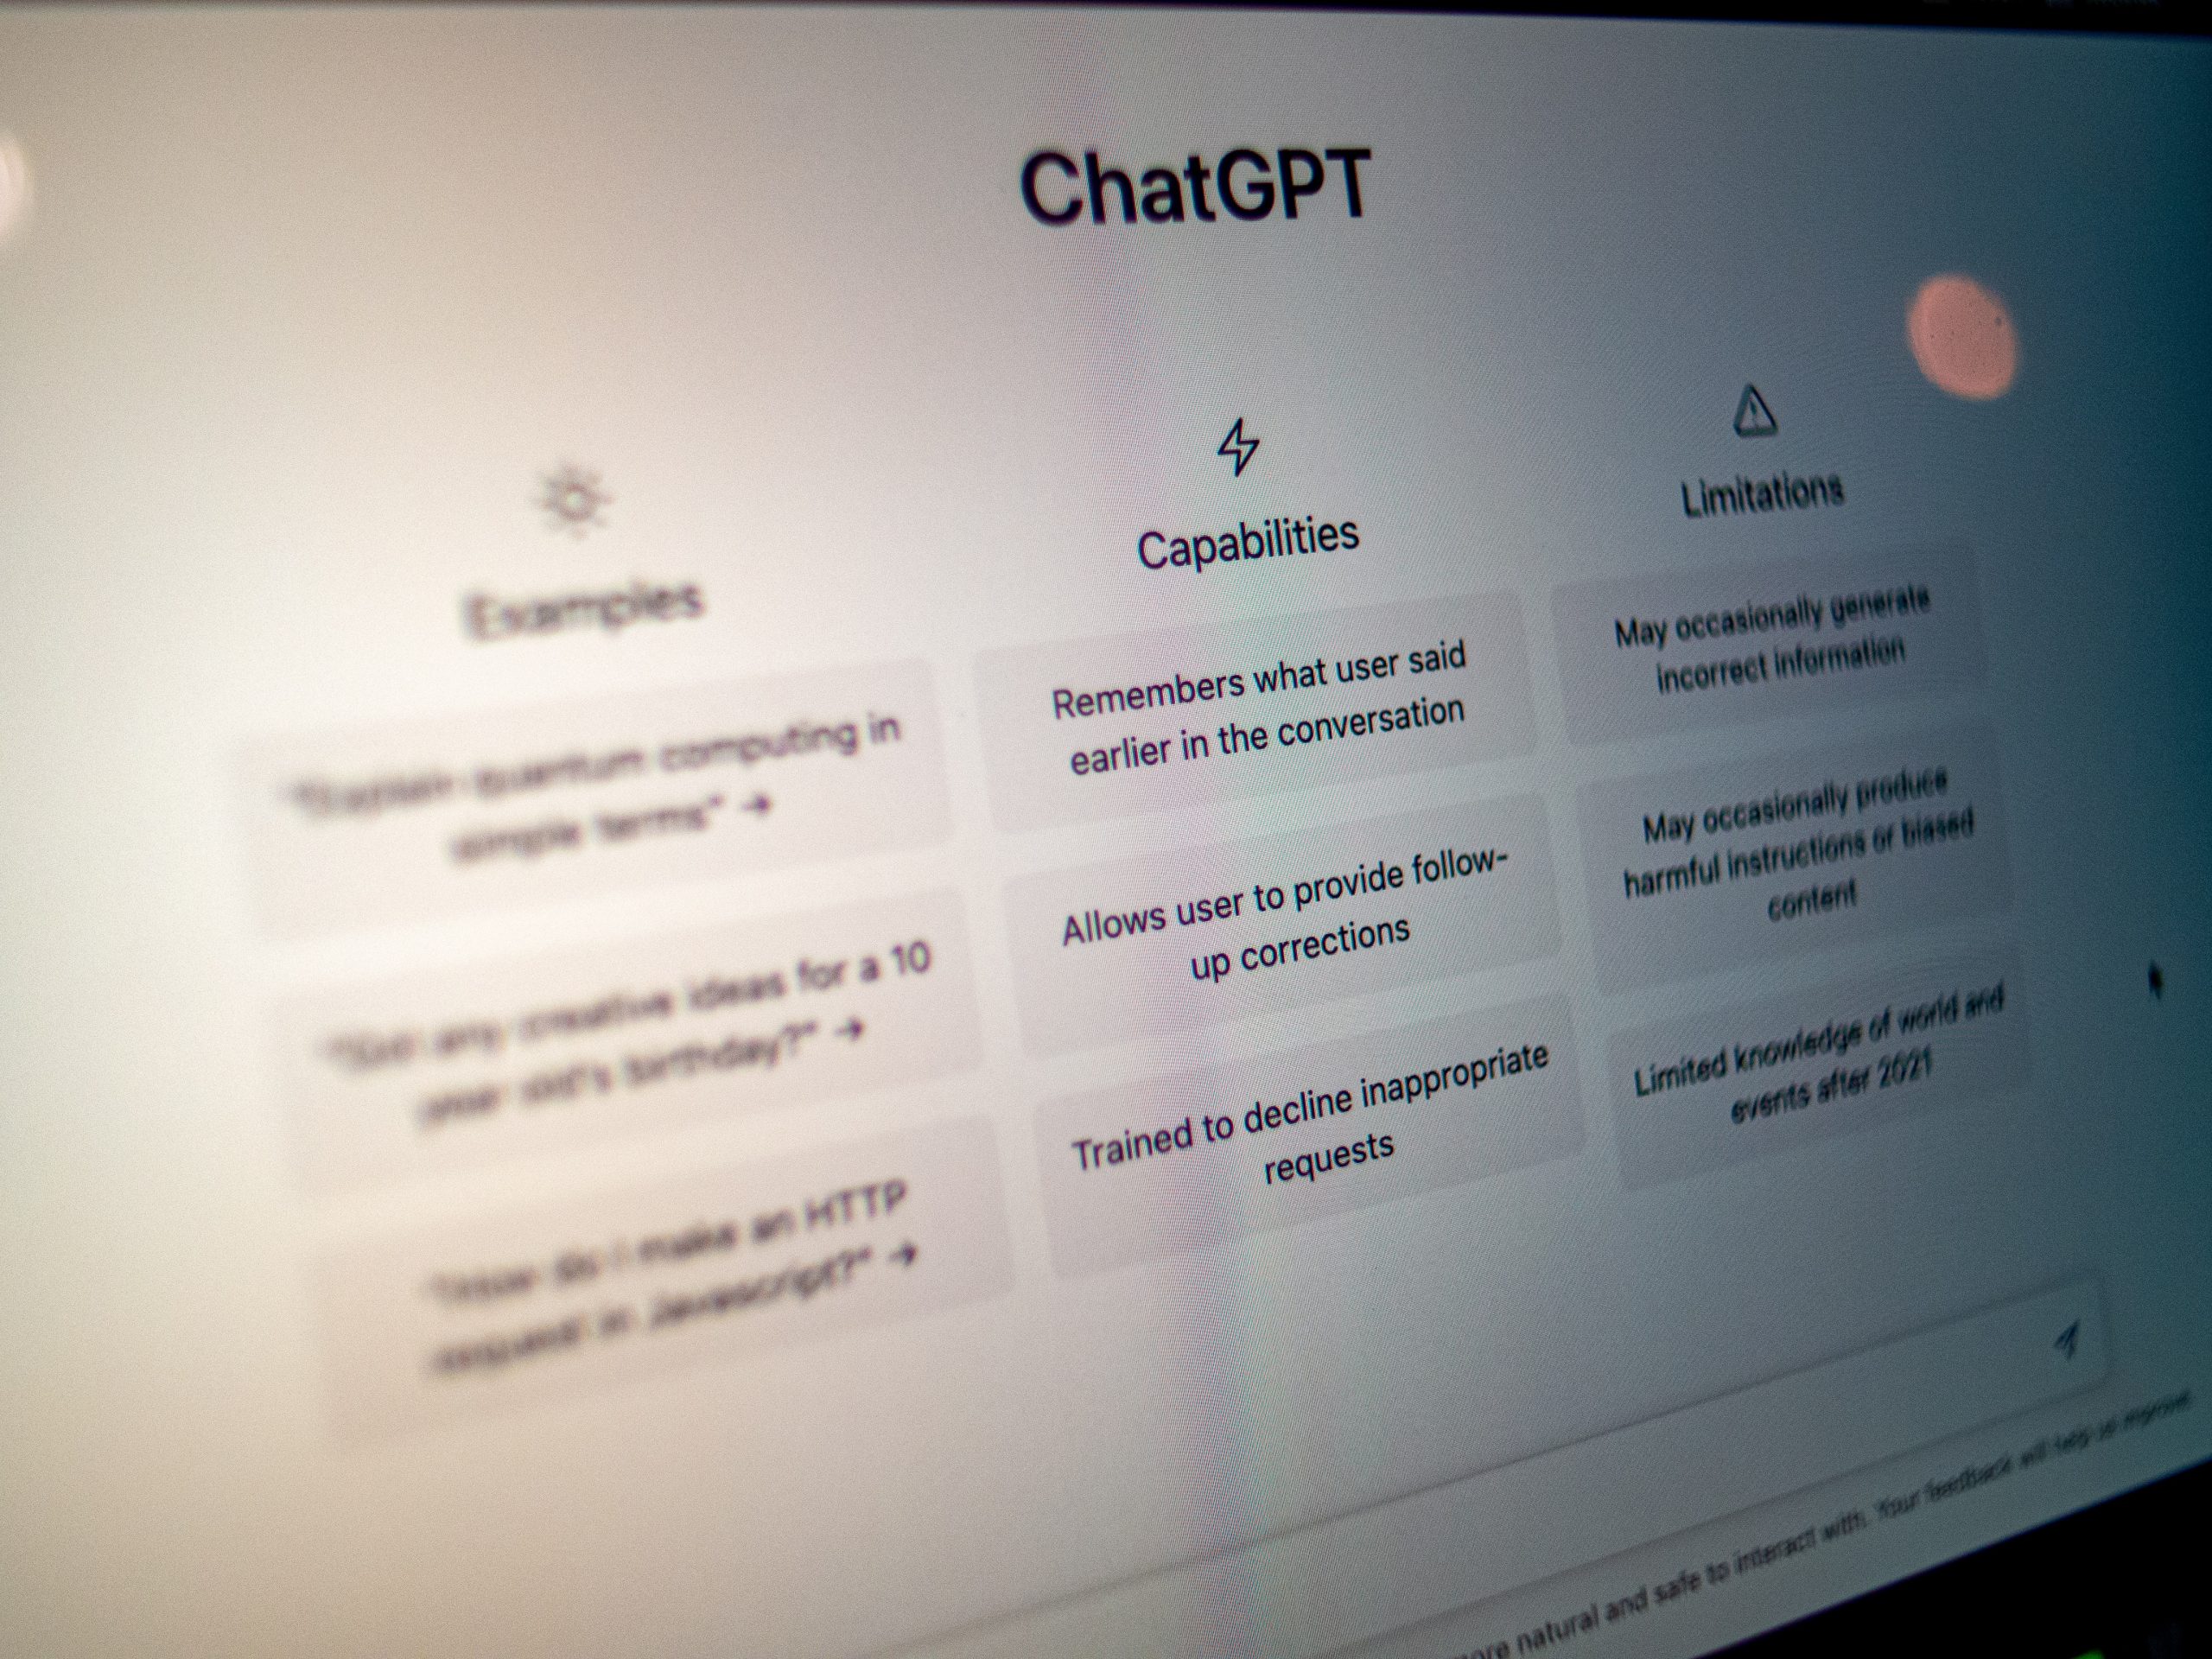 A screen showing features of Chat GPT